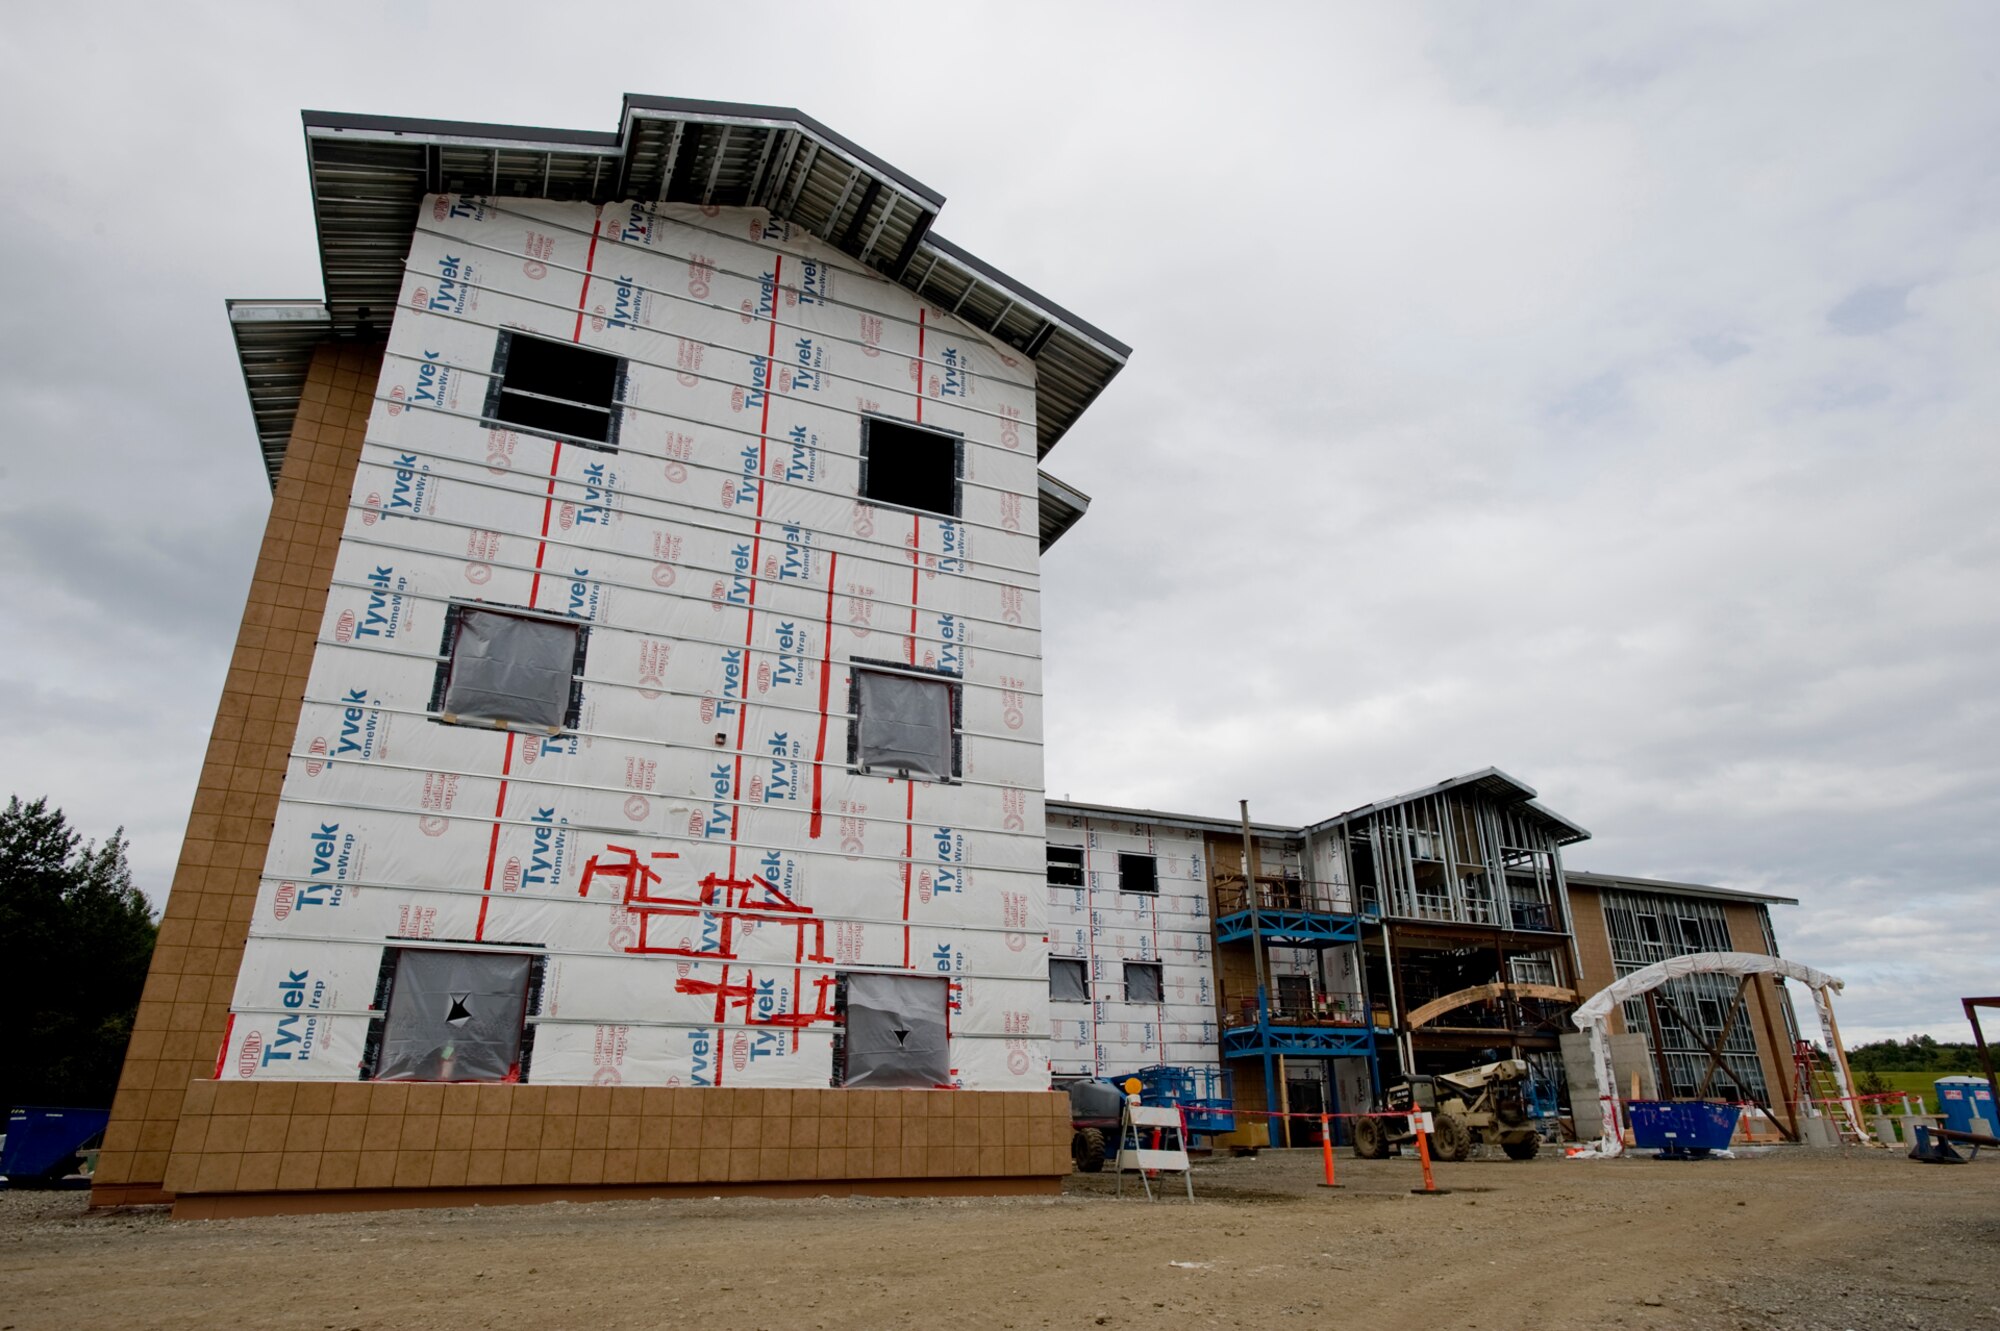 ELMENDORF AIR FORCE BASE, Alaska -- The new dormitory starts to take form as construction continues. More than 25 different sub-contracted companies are working together to ensure the dorm is completed in a timely and efficient manner.  (U.S. Air Force photo/Staff Sgt. Joshua Garcia)